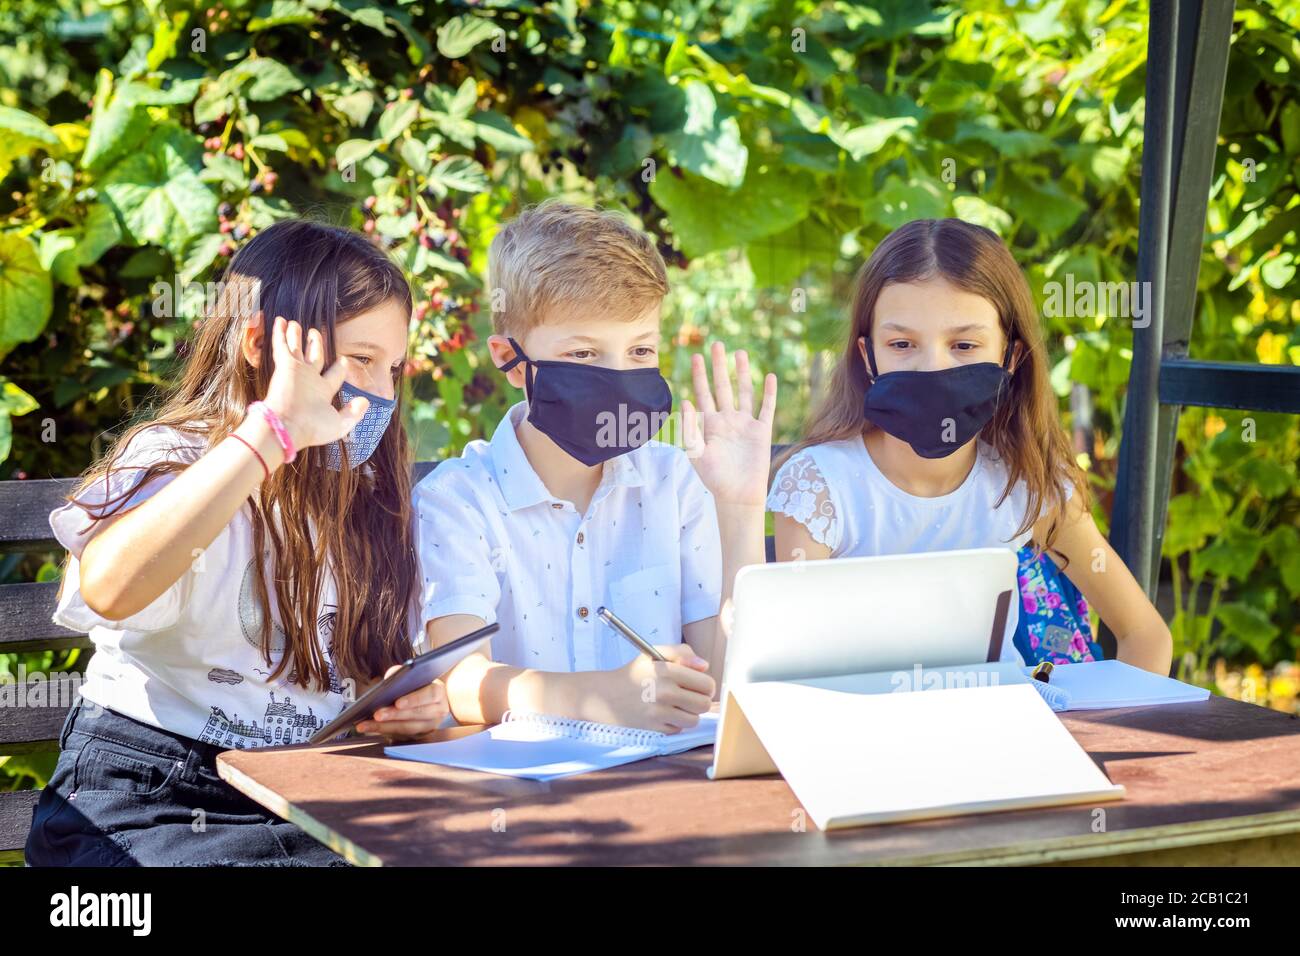 School children wearing protective face mask watching online education classes at home during corona virus lockdown outbreak Stock Photo